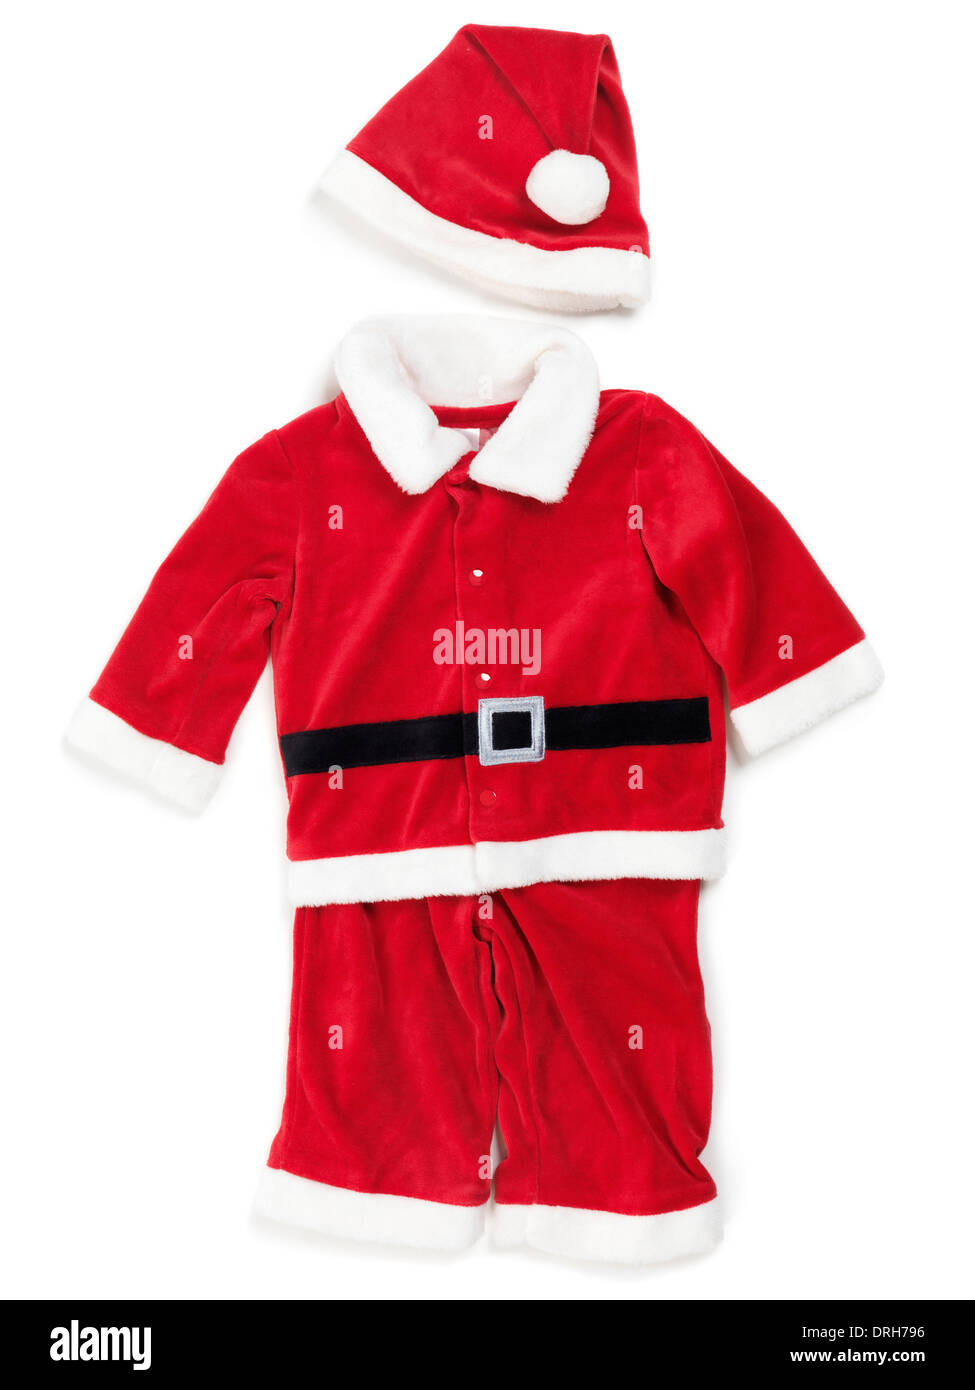 Red baby santa costume. Isolated outfit on white background. Stock Photo